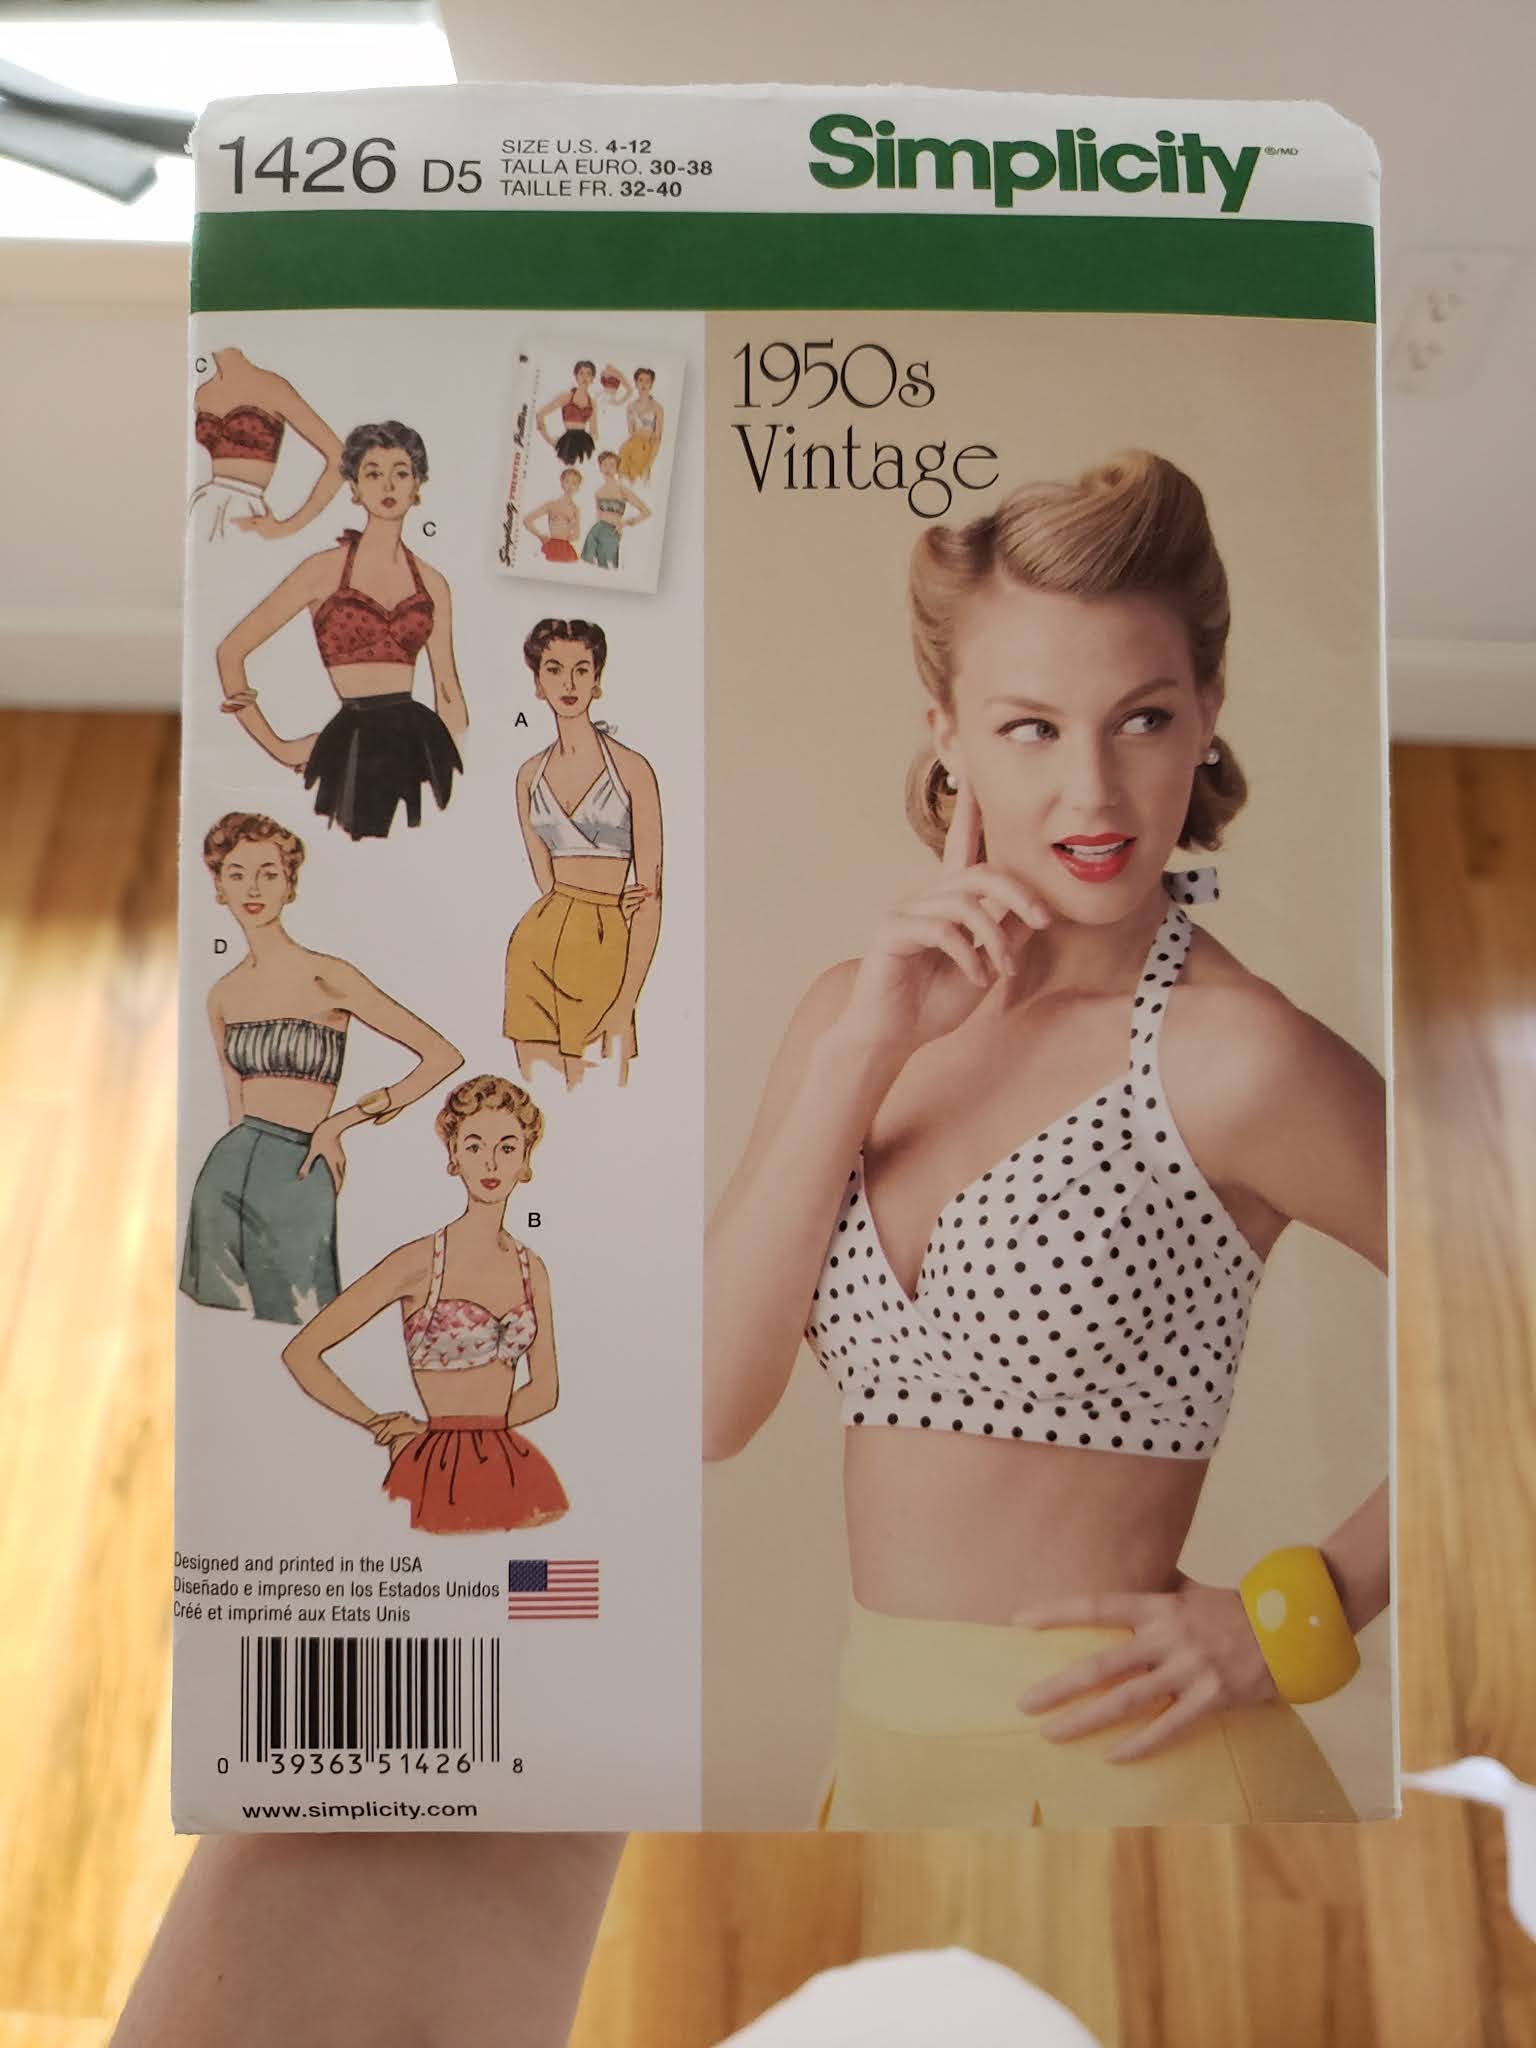 Sewing the Simplicity 1426 (small bust adjustment + extended